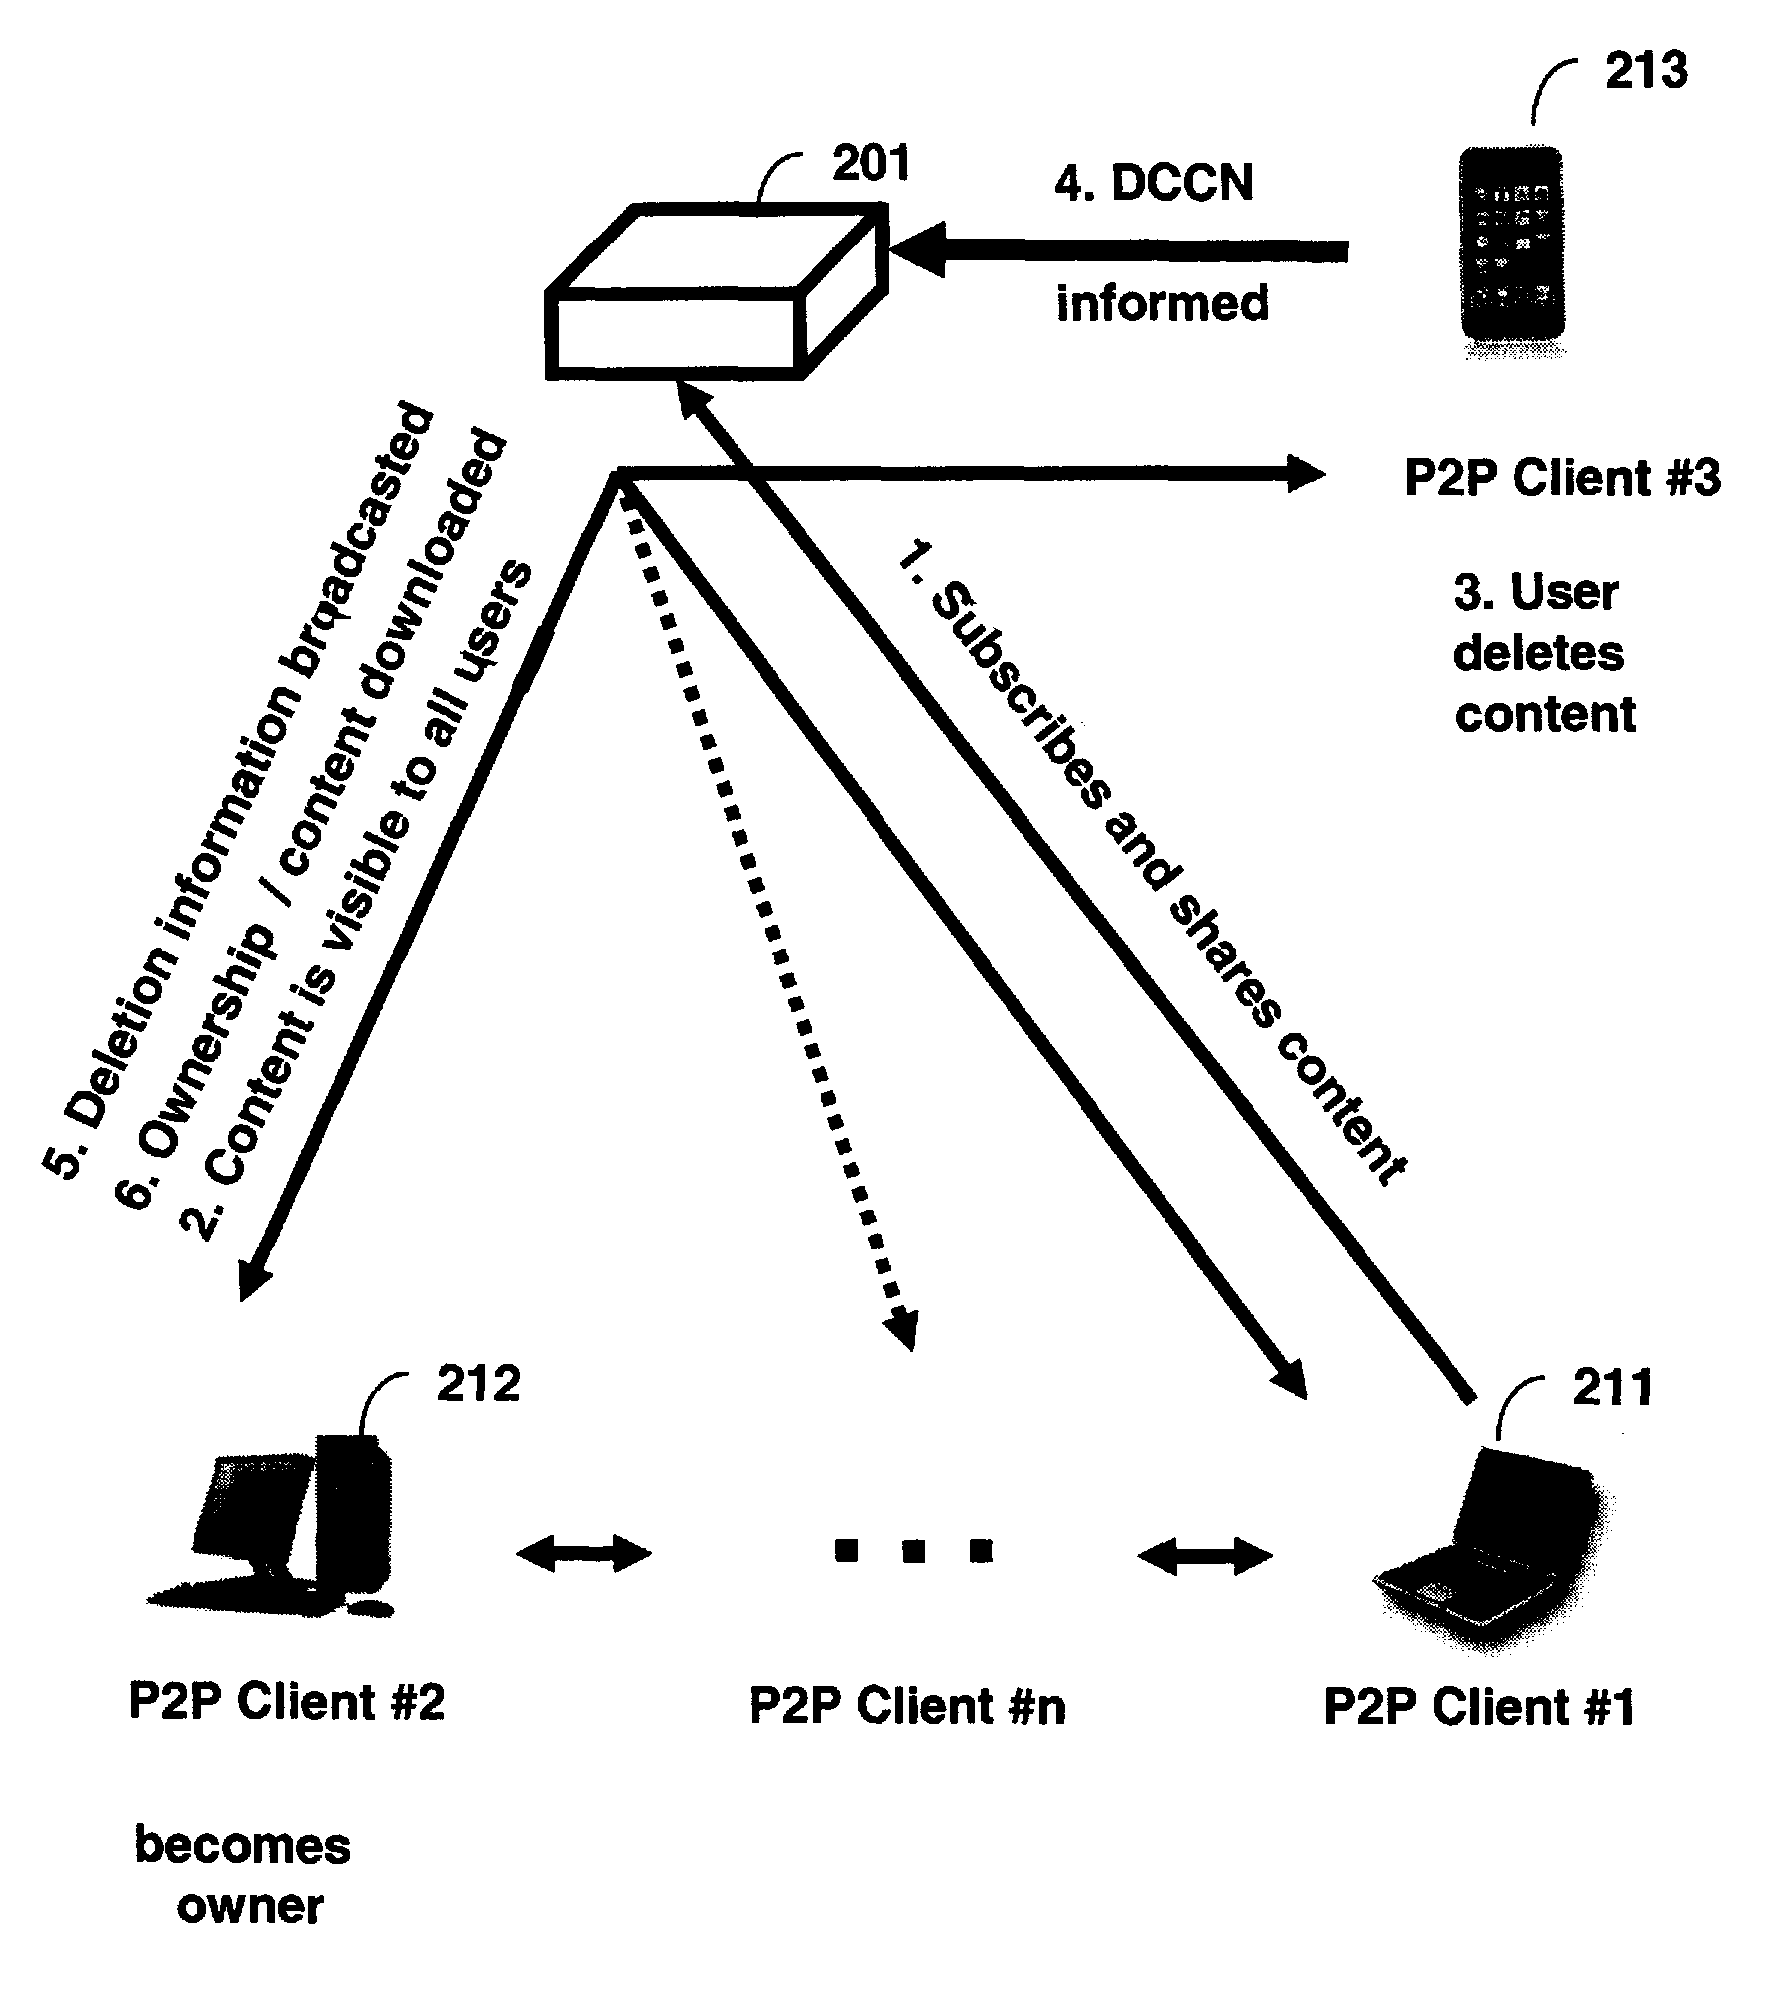 Method and system of administrating a peer-to-peer file sharing network